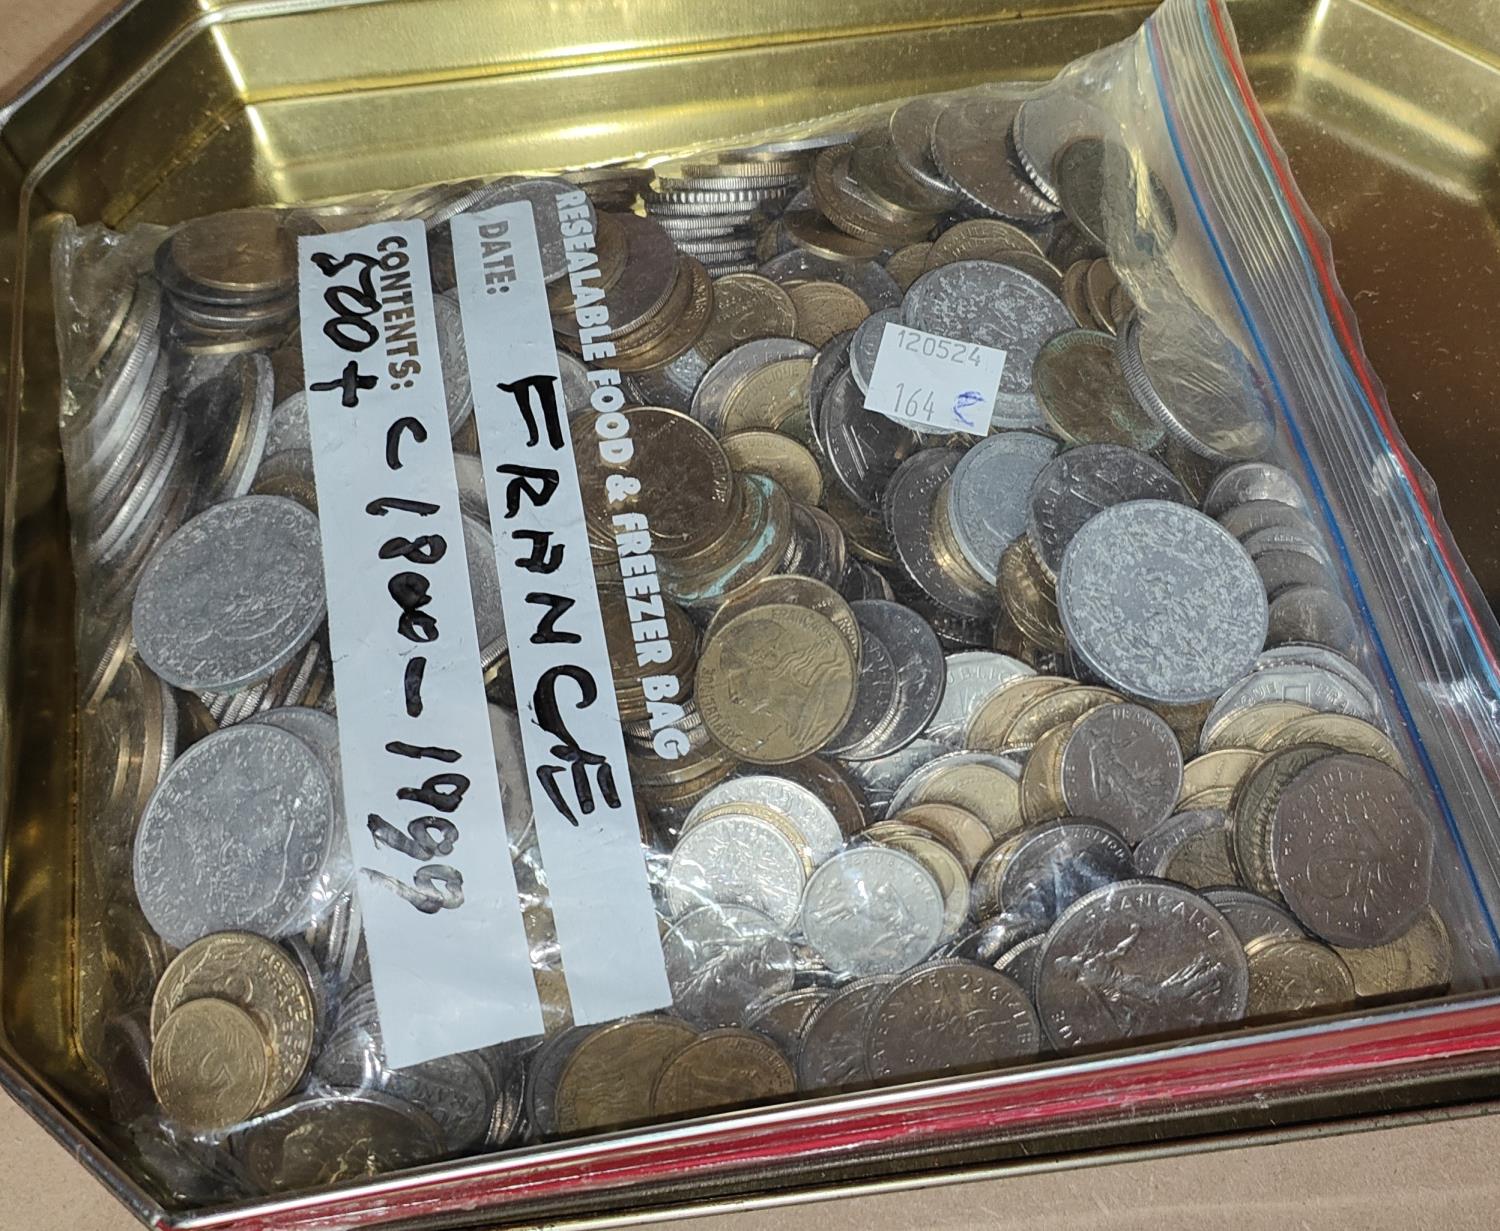 A large collection of French and other European coins